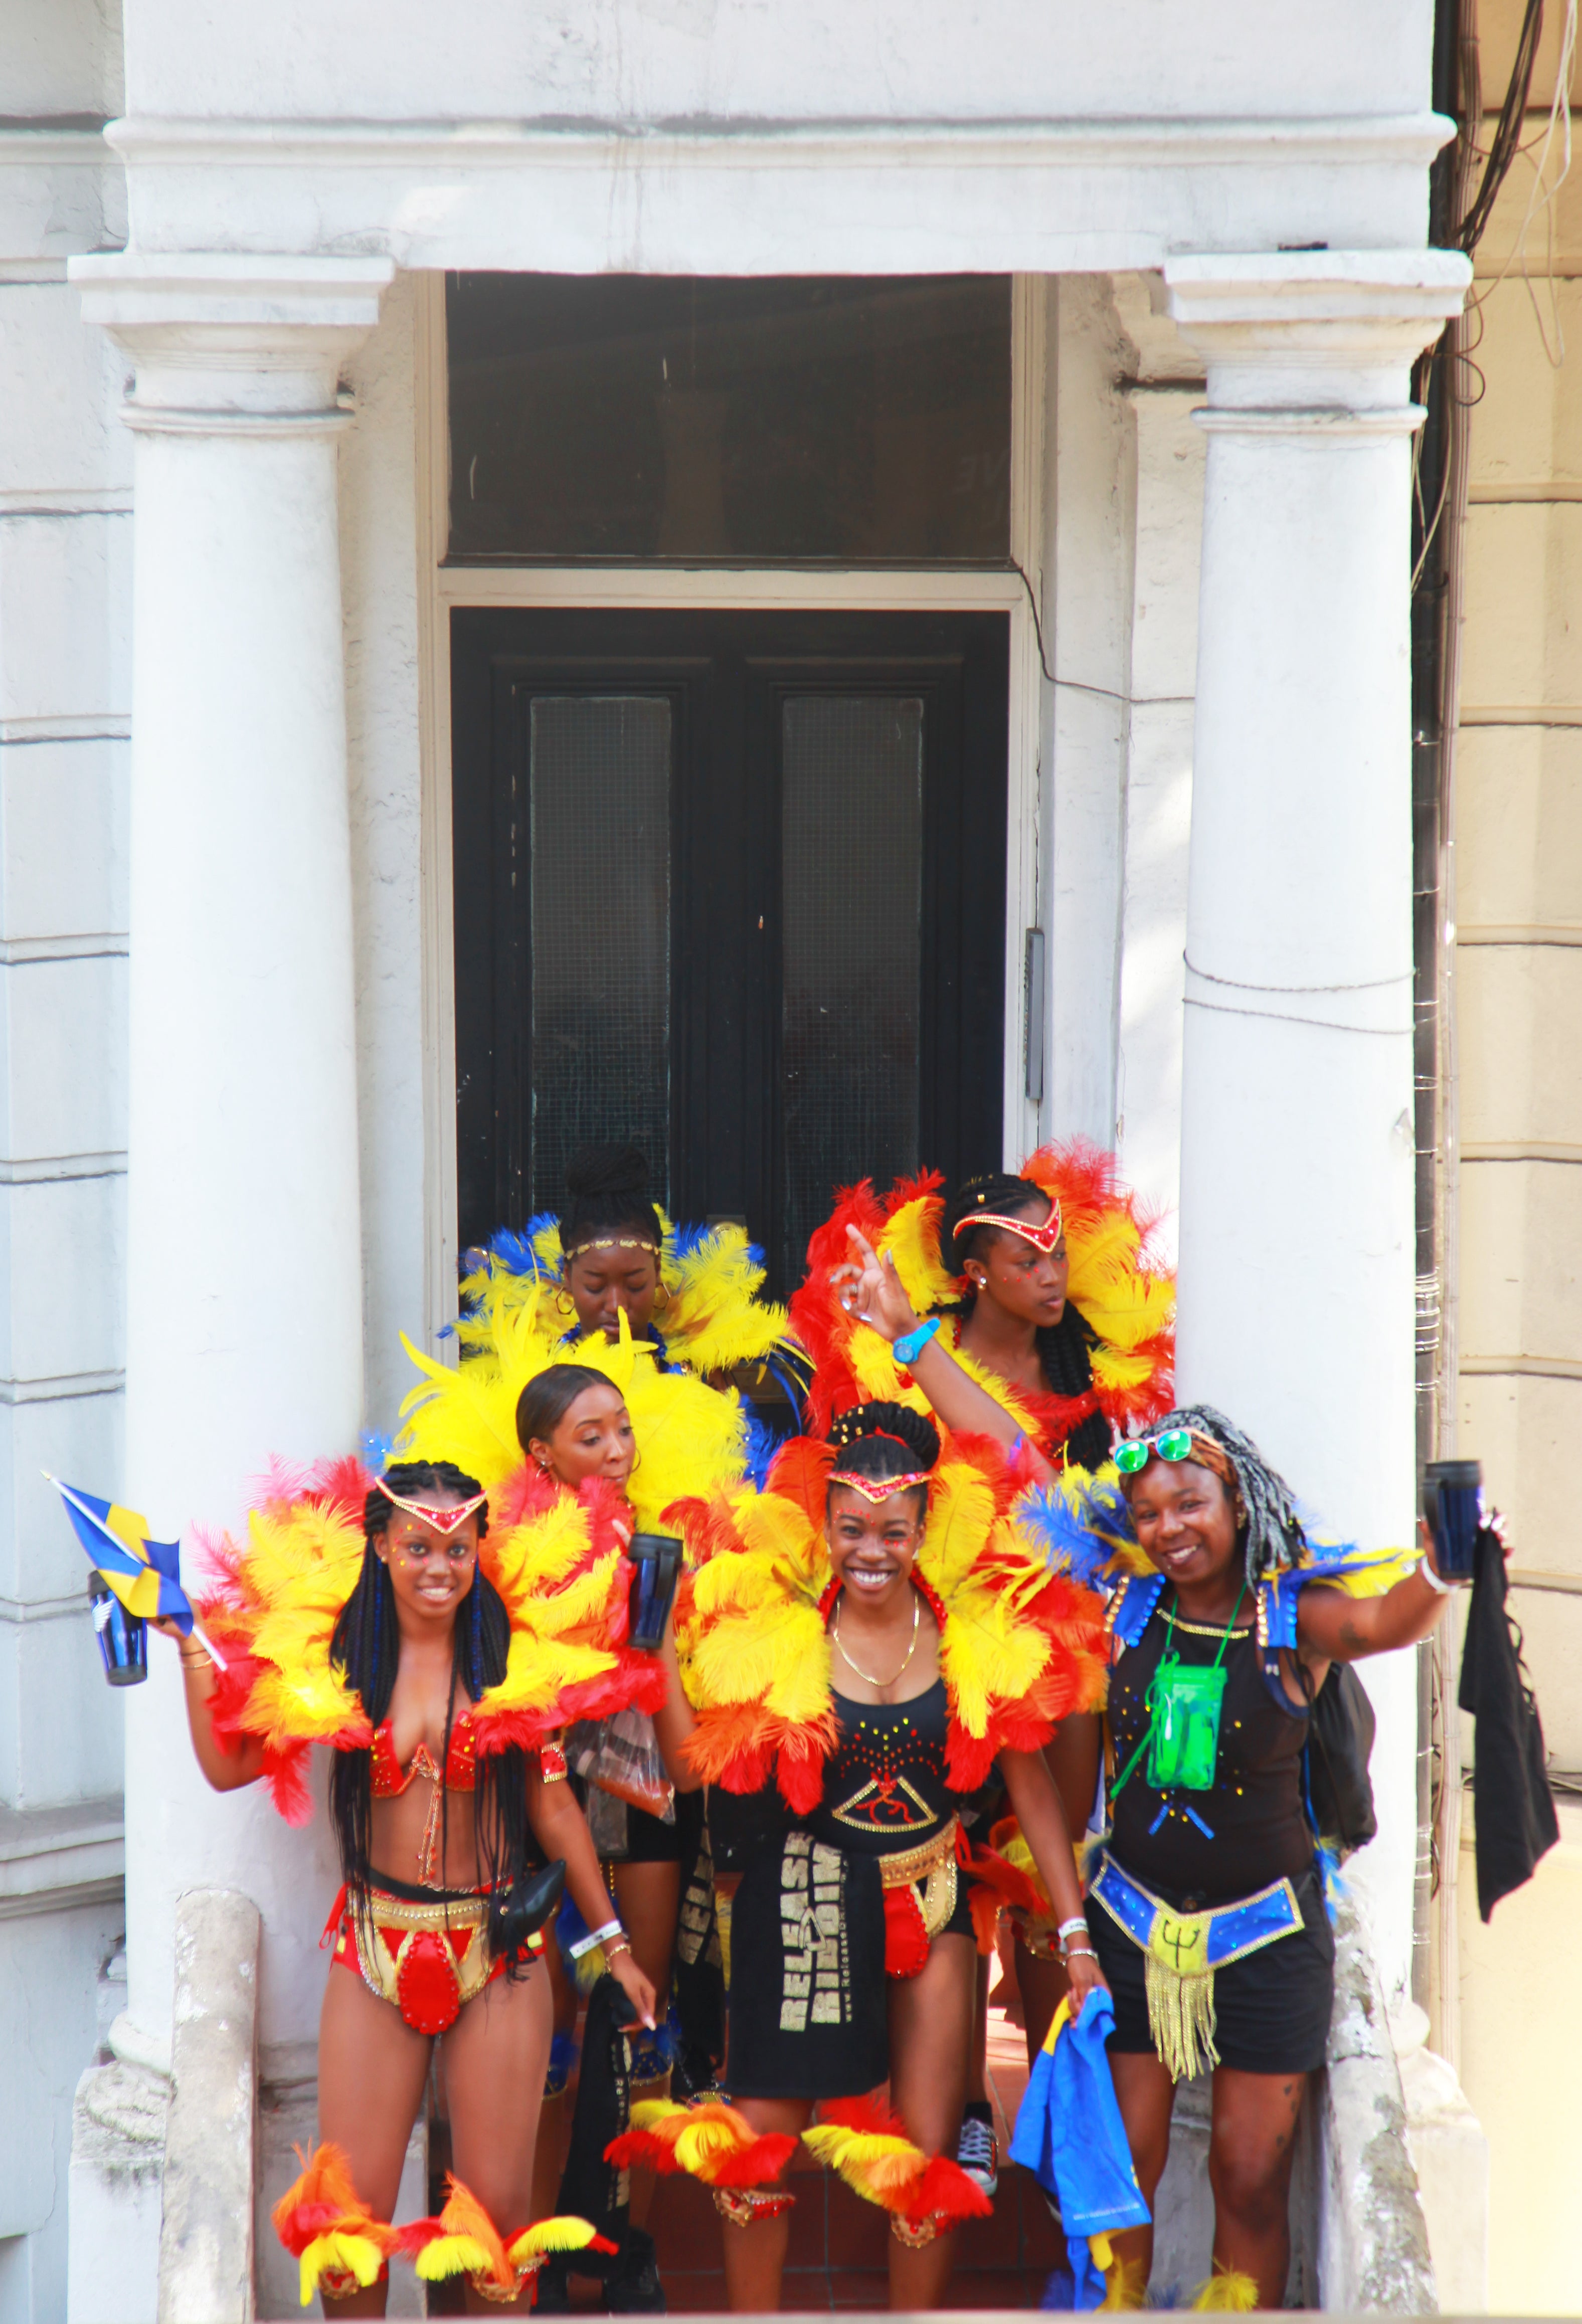 Brits Live It Up at the Notting Hill Carnival